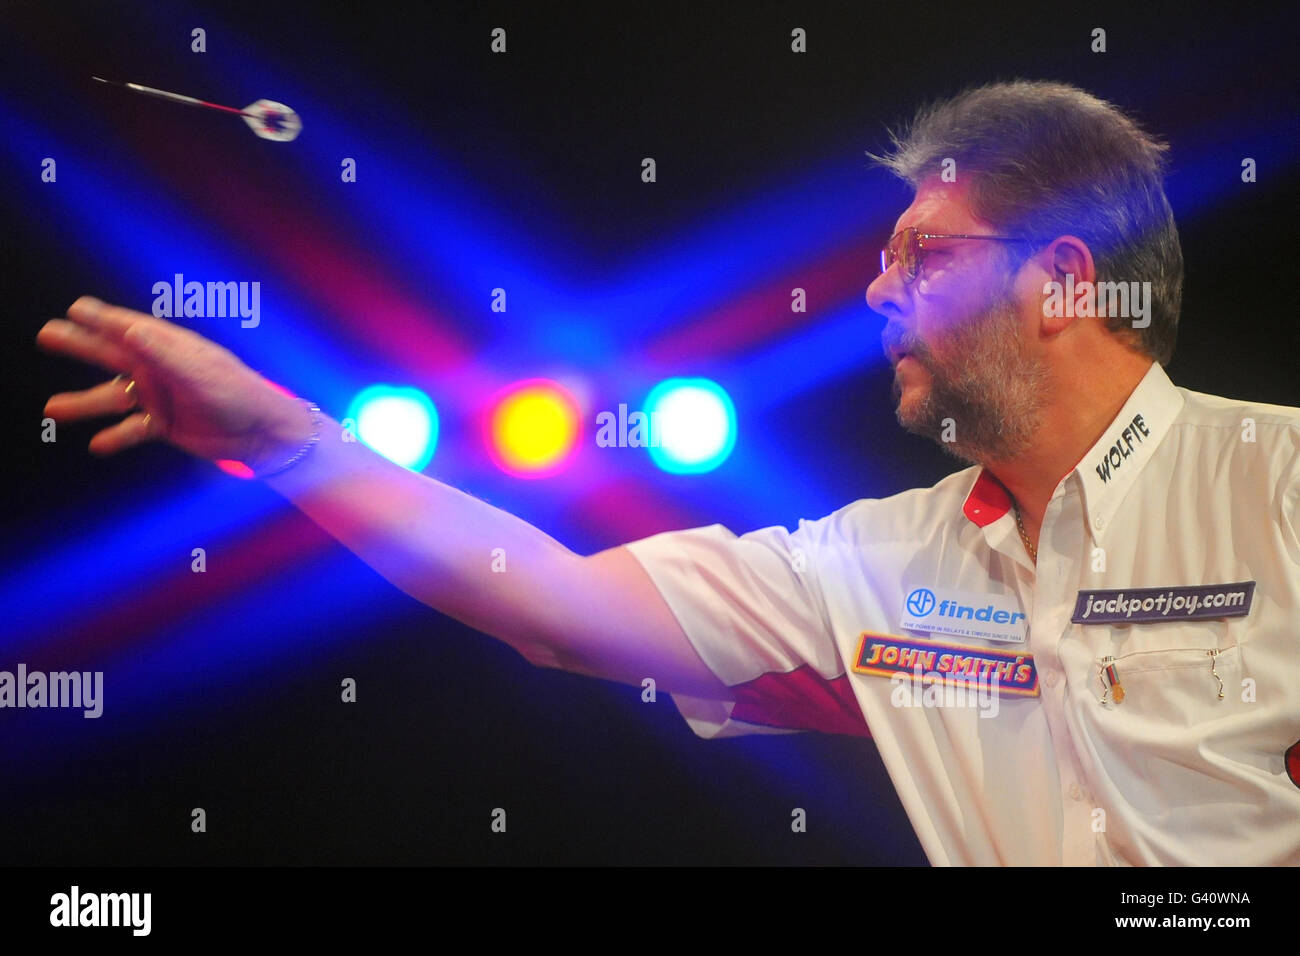 England's Martin Adams in action during his final against England's Dean Winstanley during the BDO World Professional Darts Championship at the Lakeside Complex, Surrey. Stock Photo